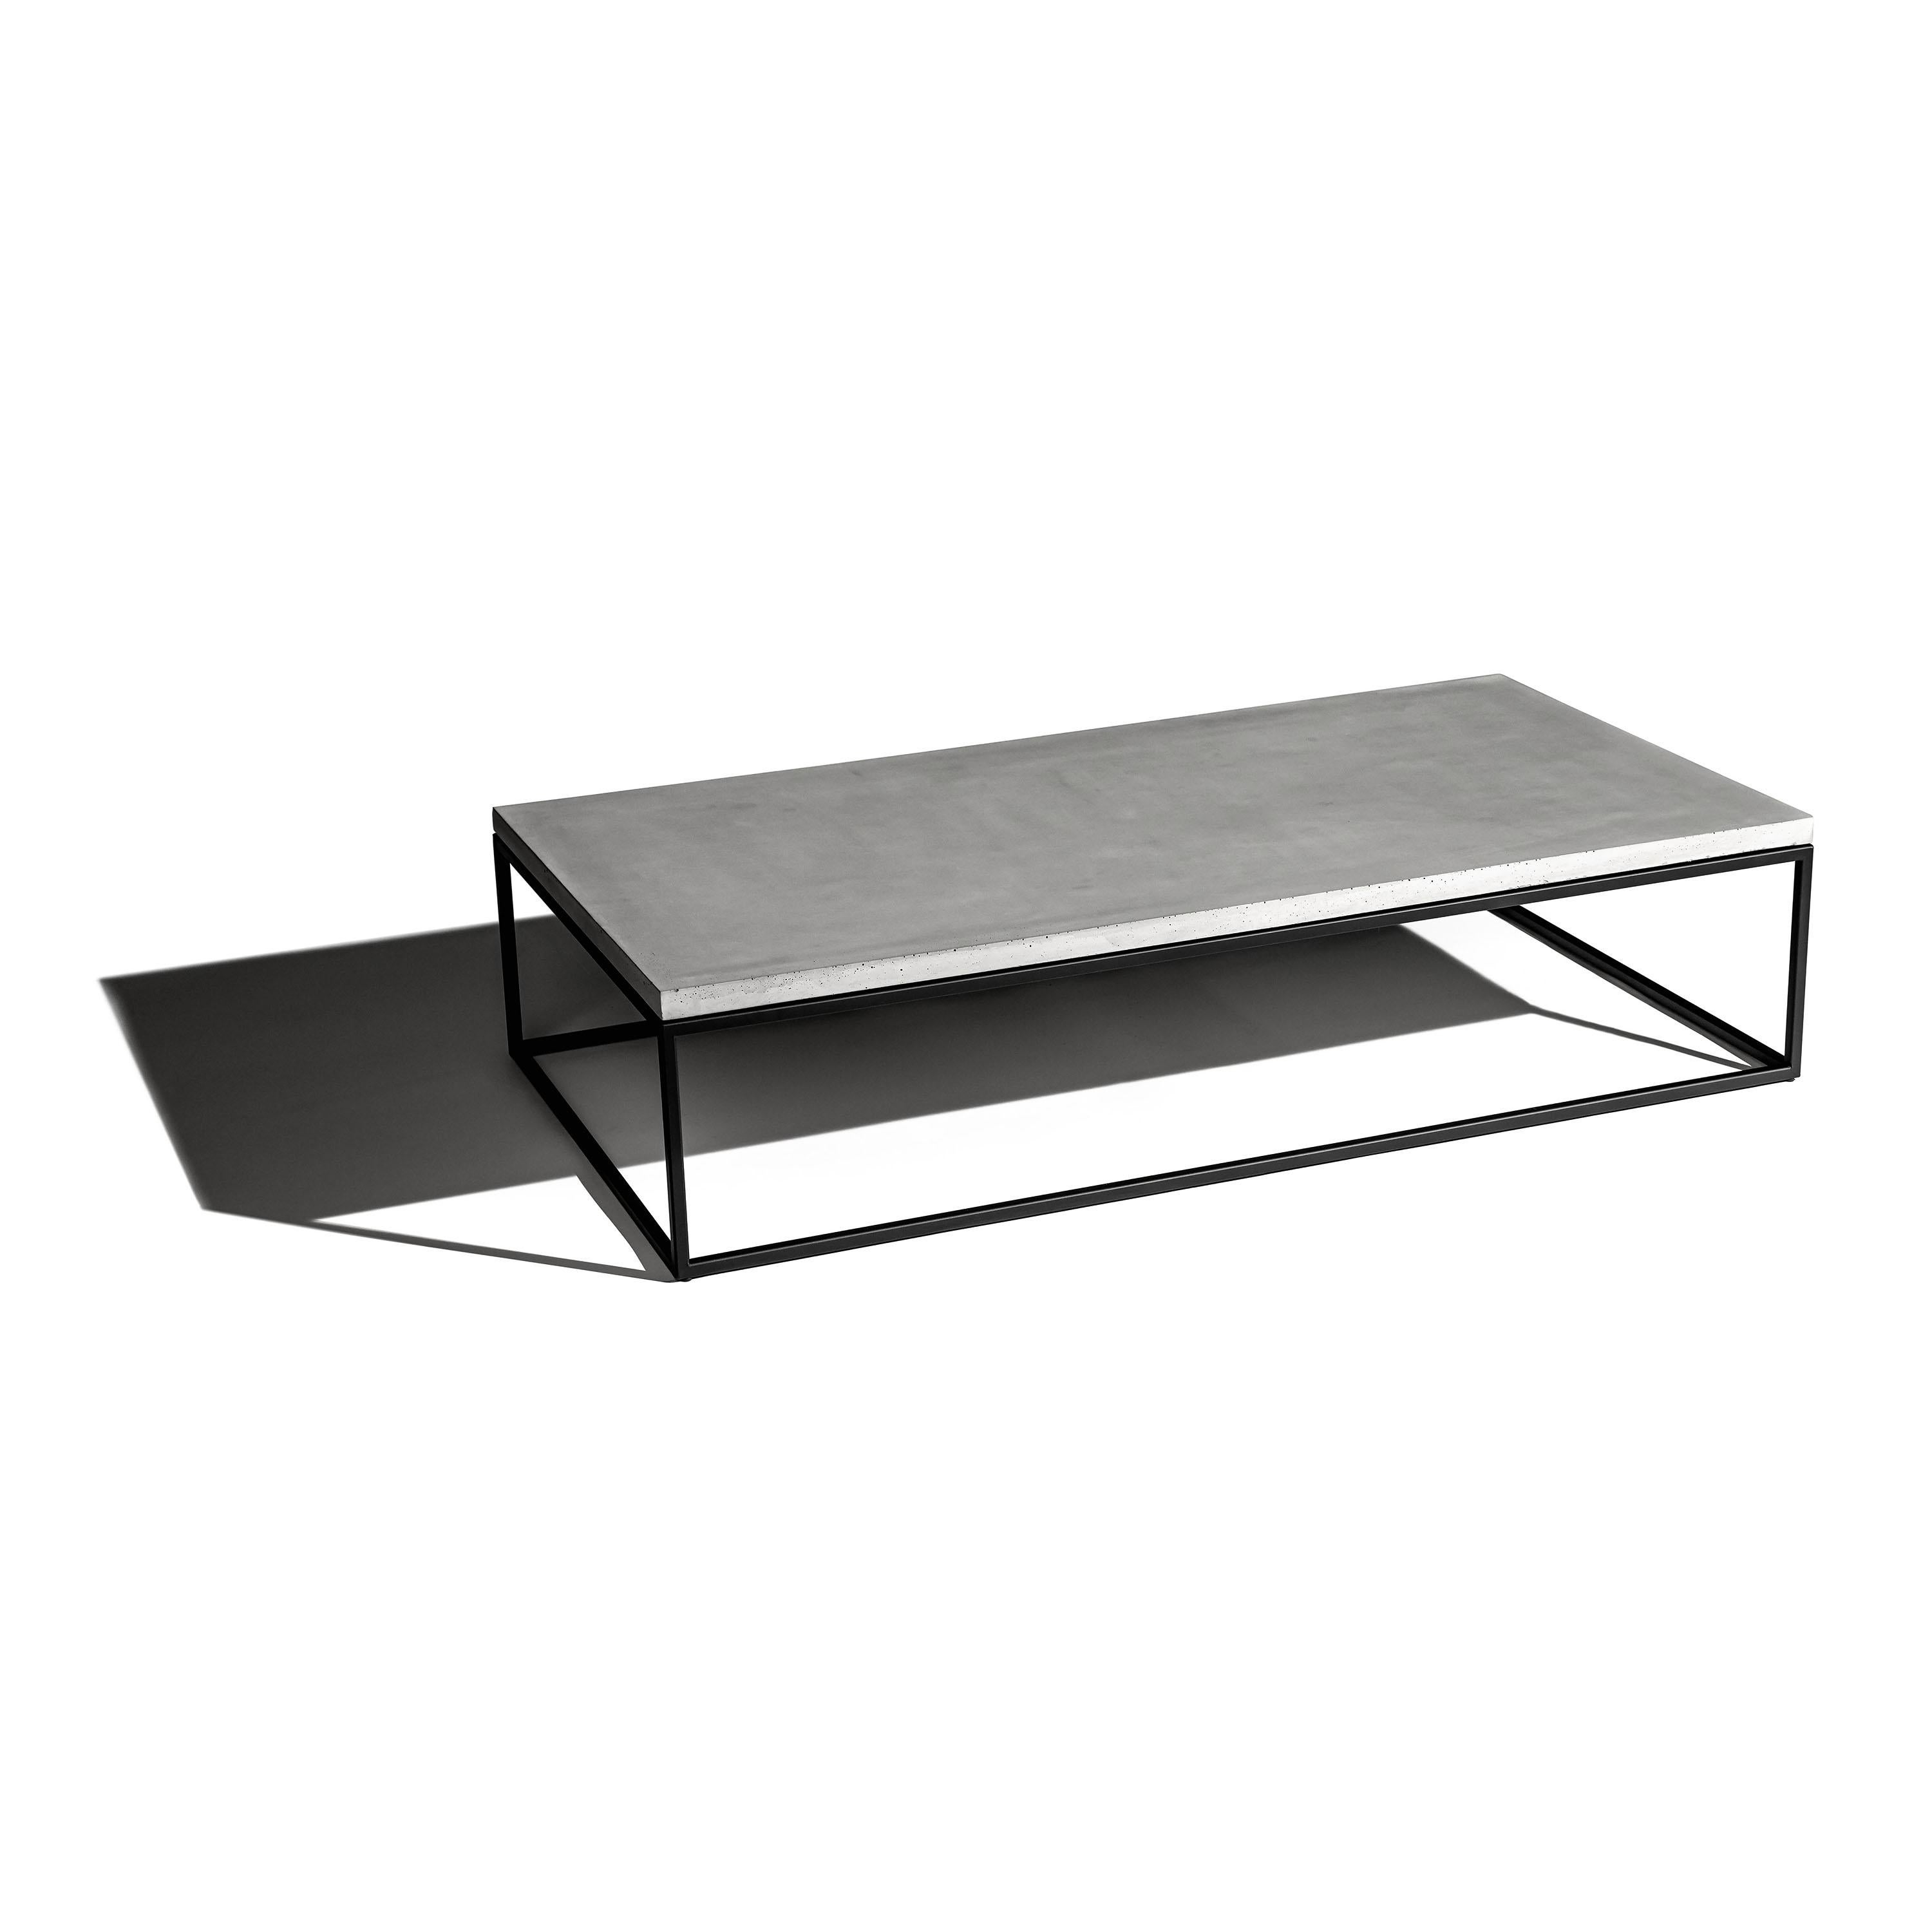 French Perspective 1300x700 Coffee Table Black